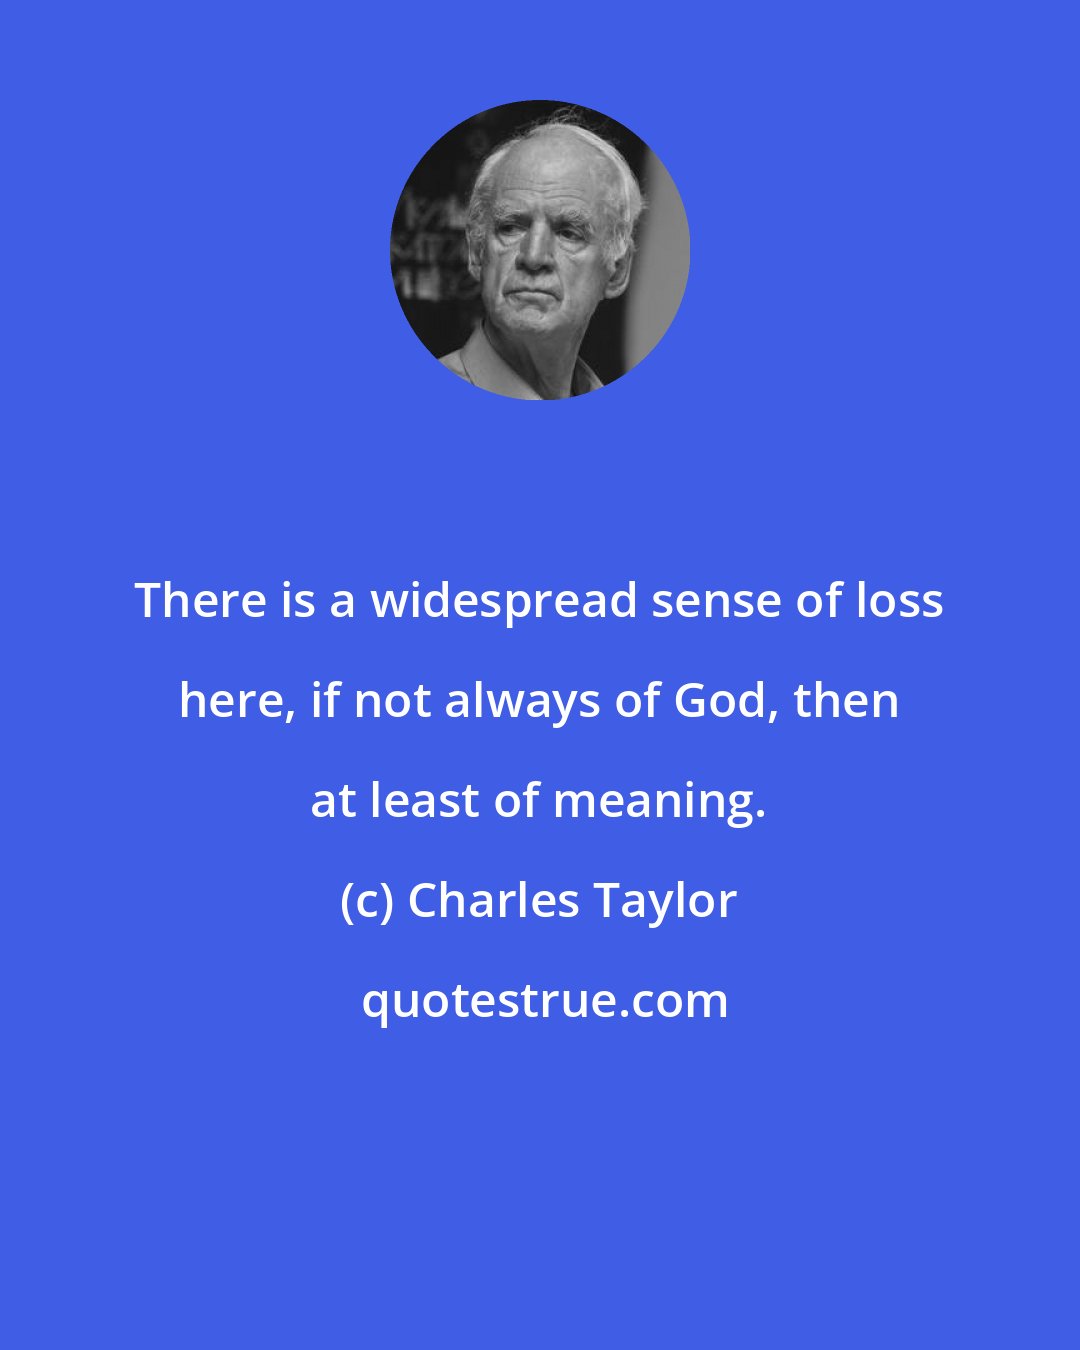 Charles Taylor: There is a widespread sense of loss here, if not always of God, then at least of meaning.